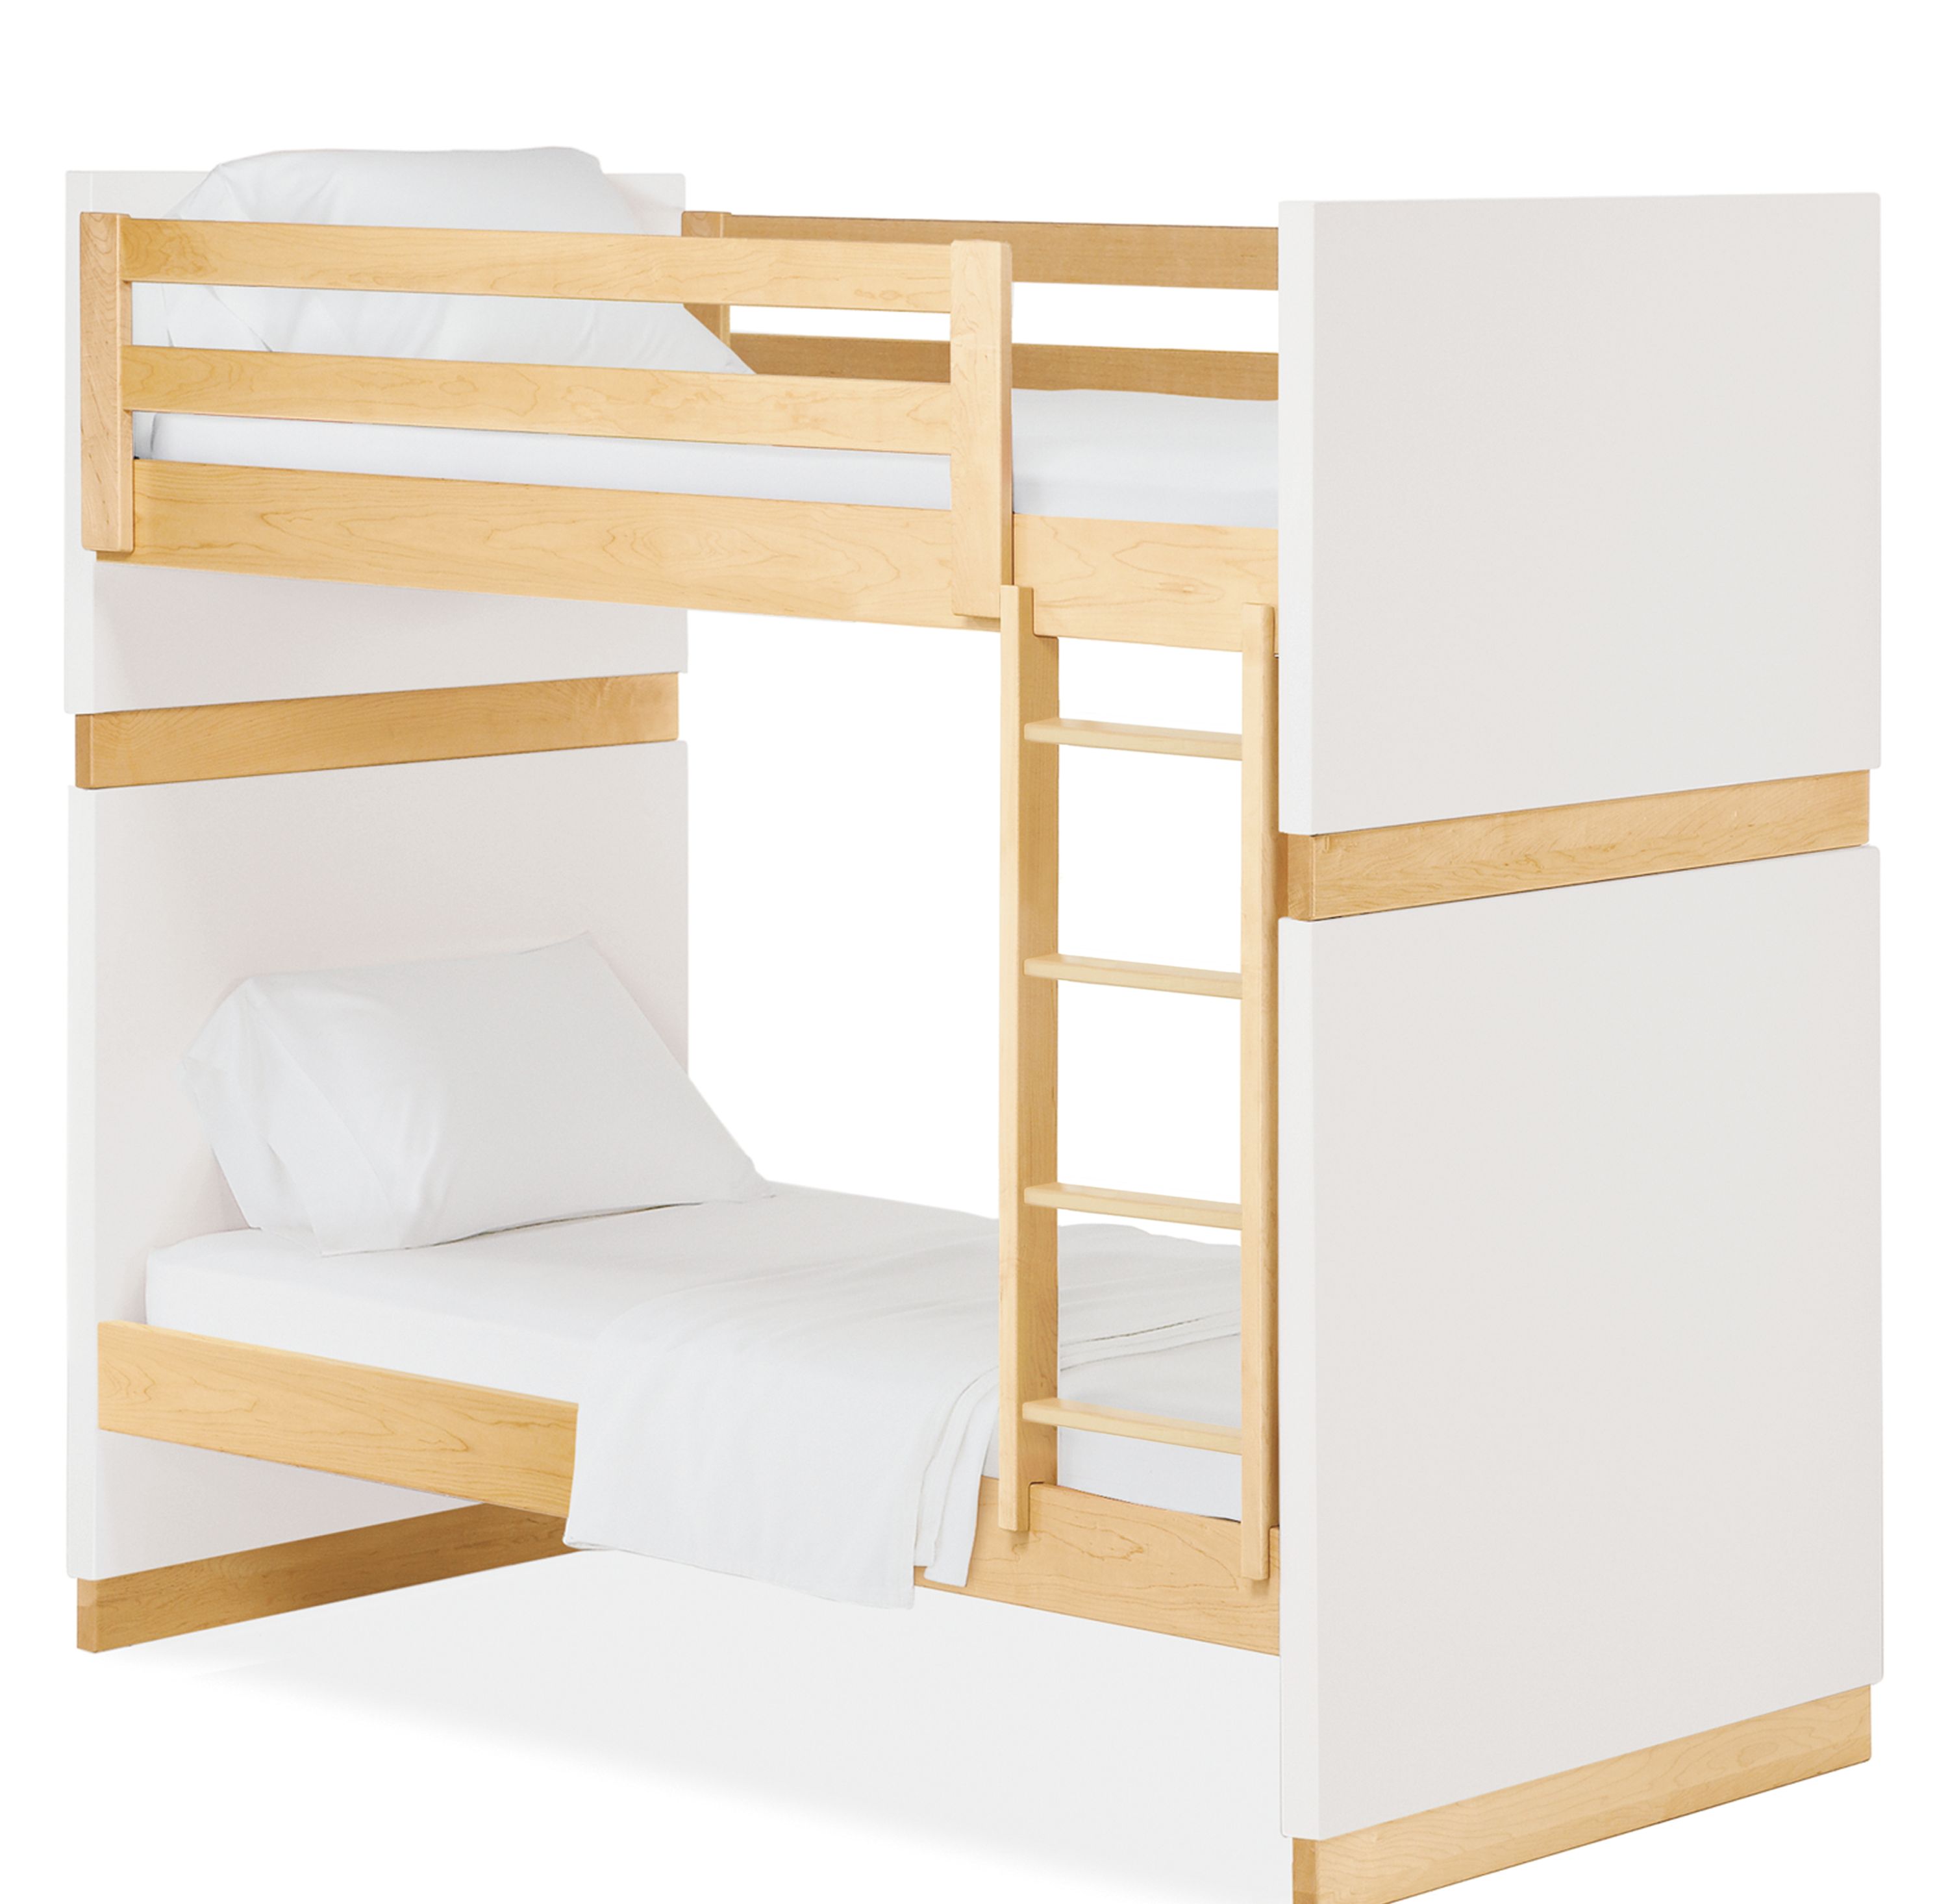 Moda Bunk Beds Twin Over, Bunk Beds Monthly Payments